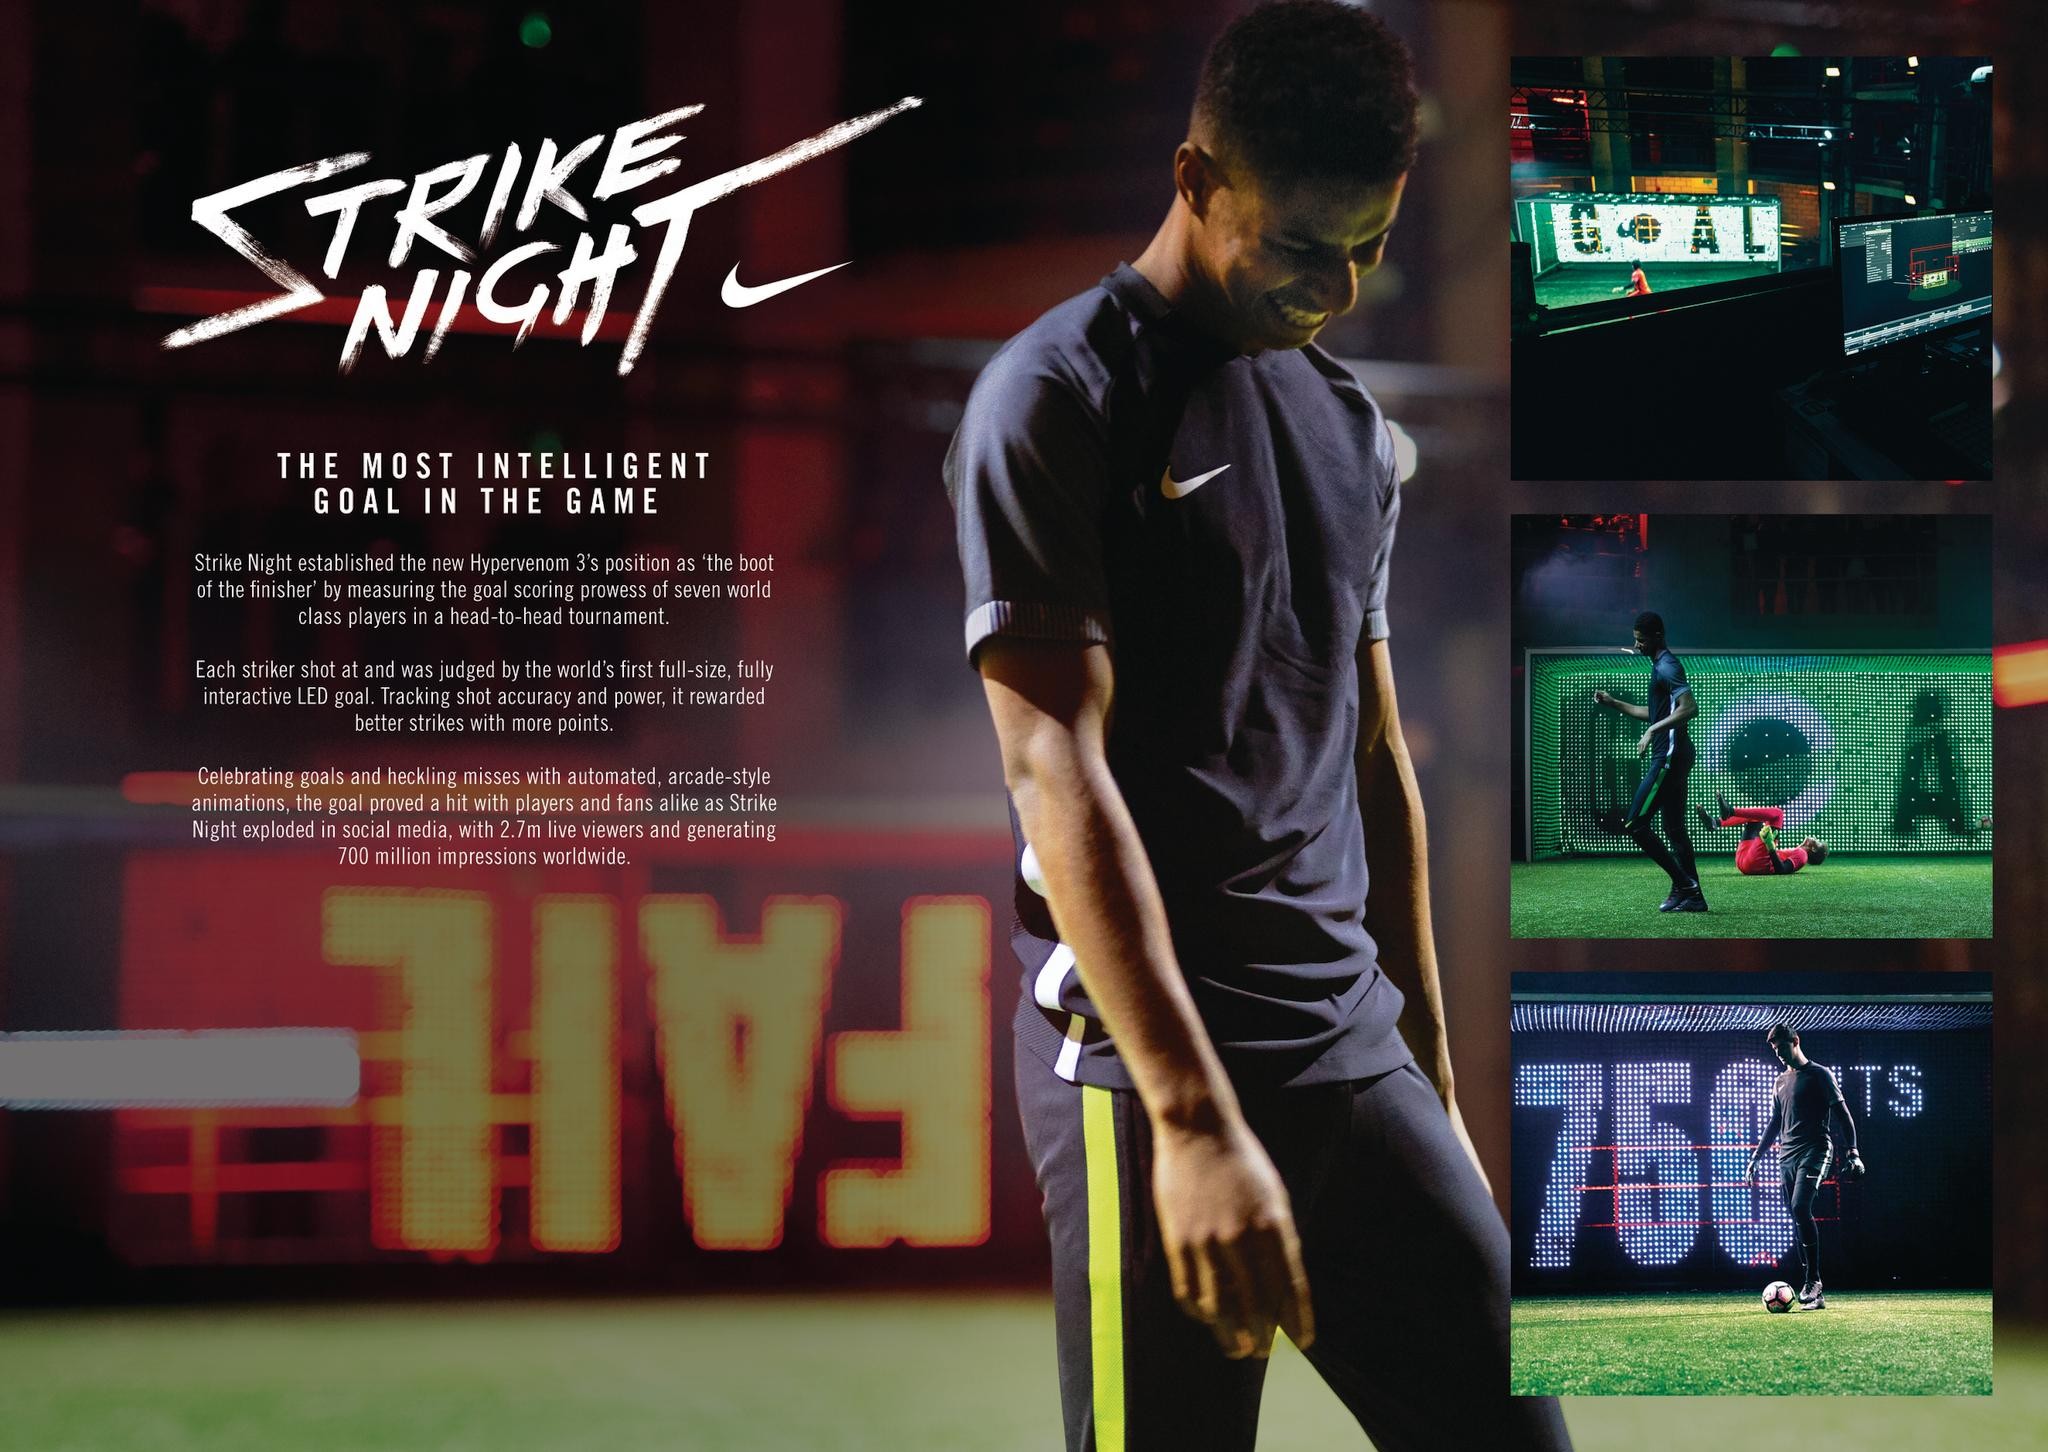 STRIKE NIGHT, FEATURING THE MOST INTELLIGENT GOAL IN THE GAME. 